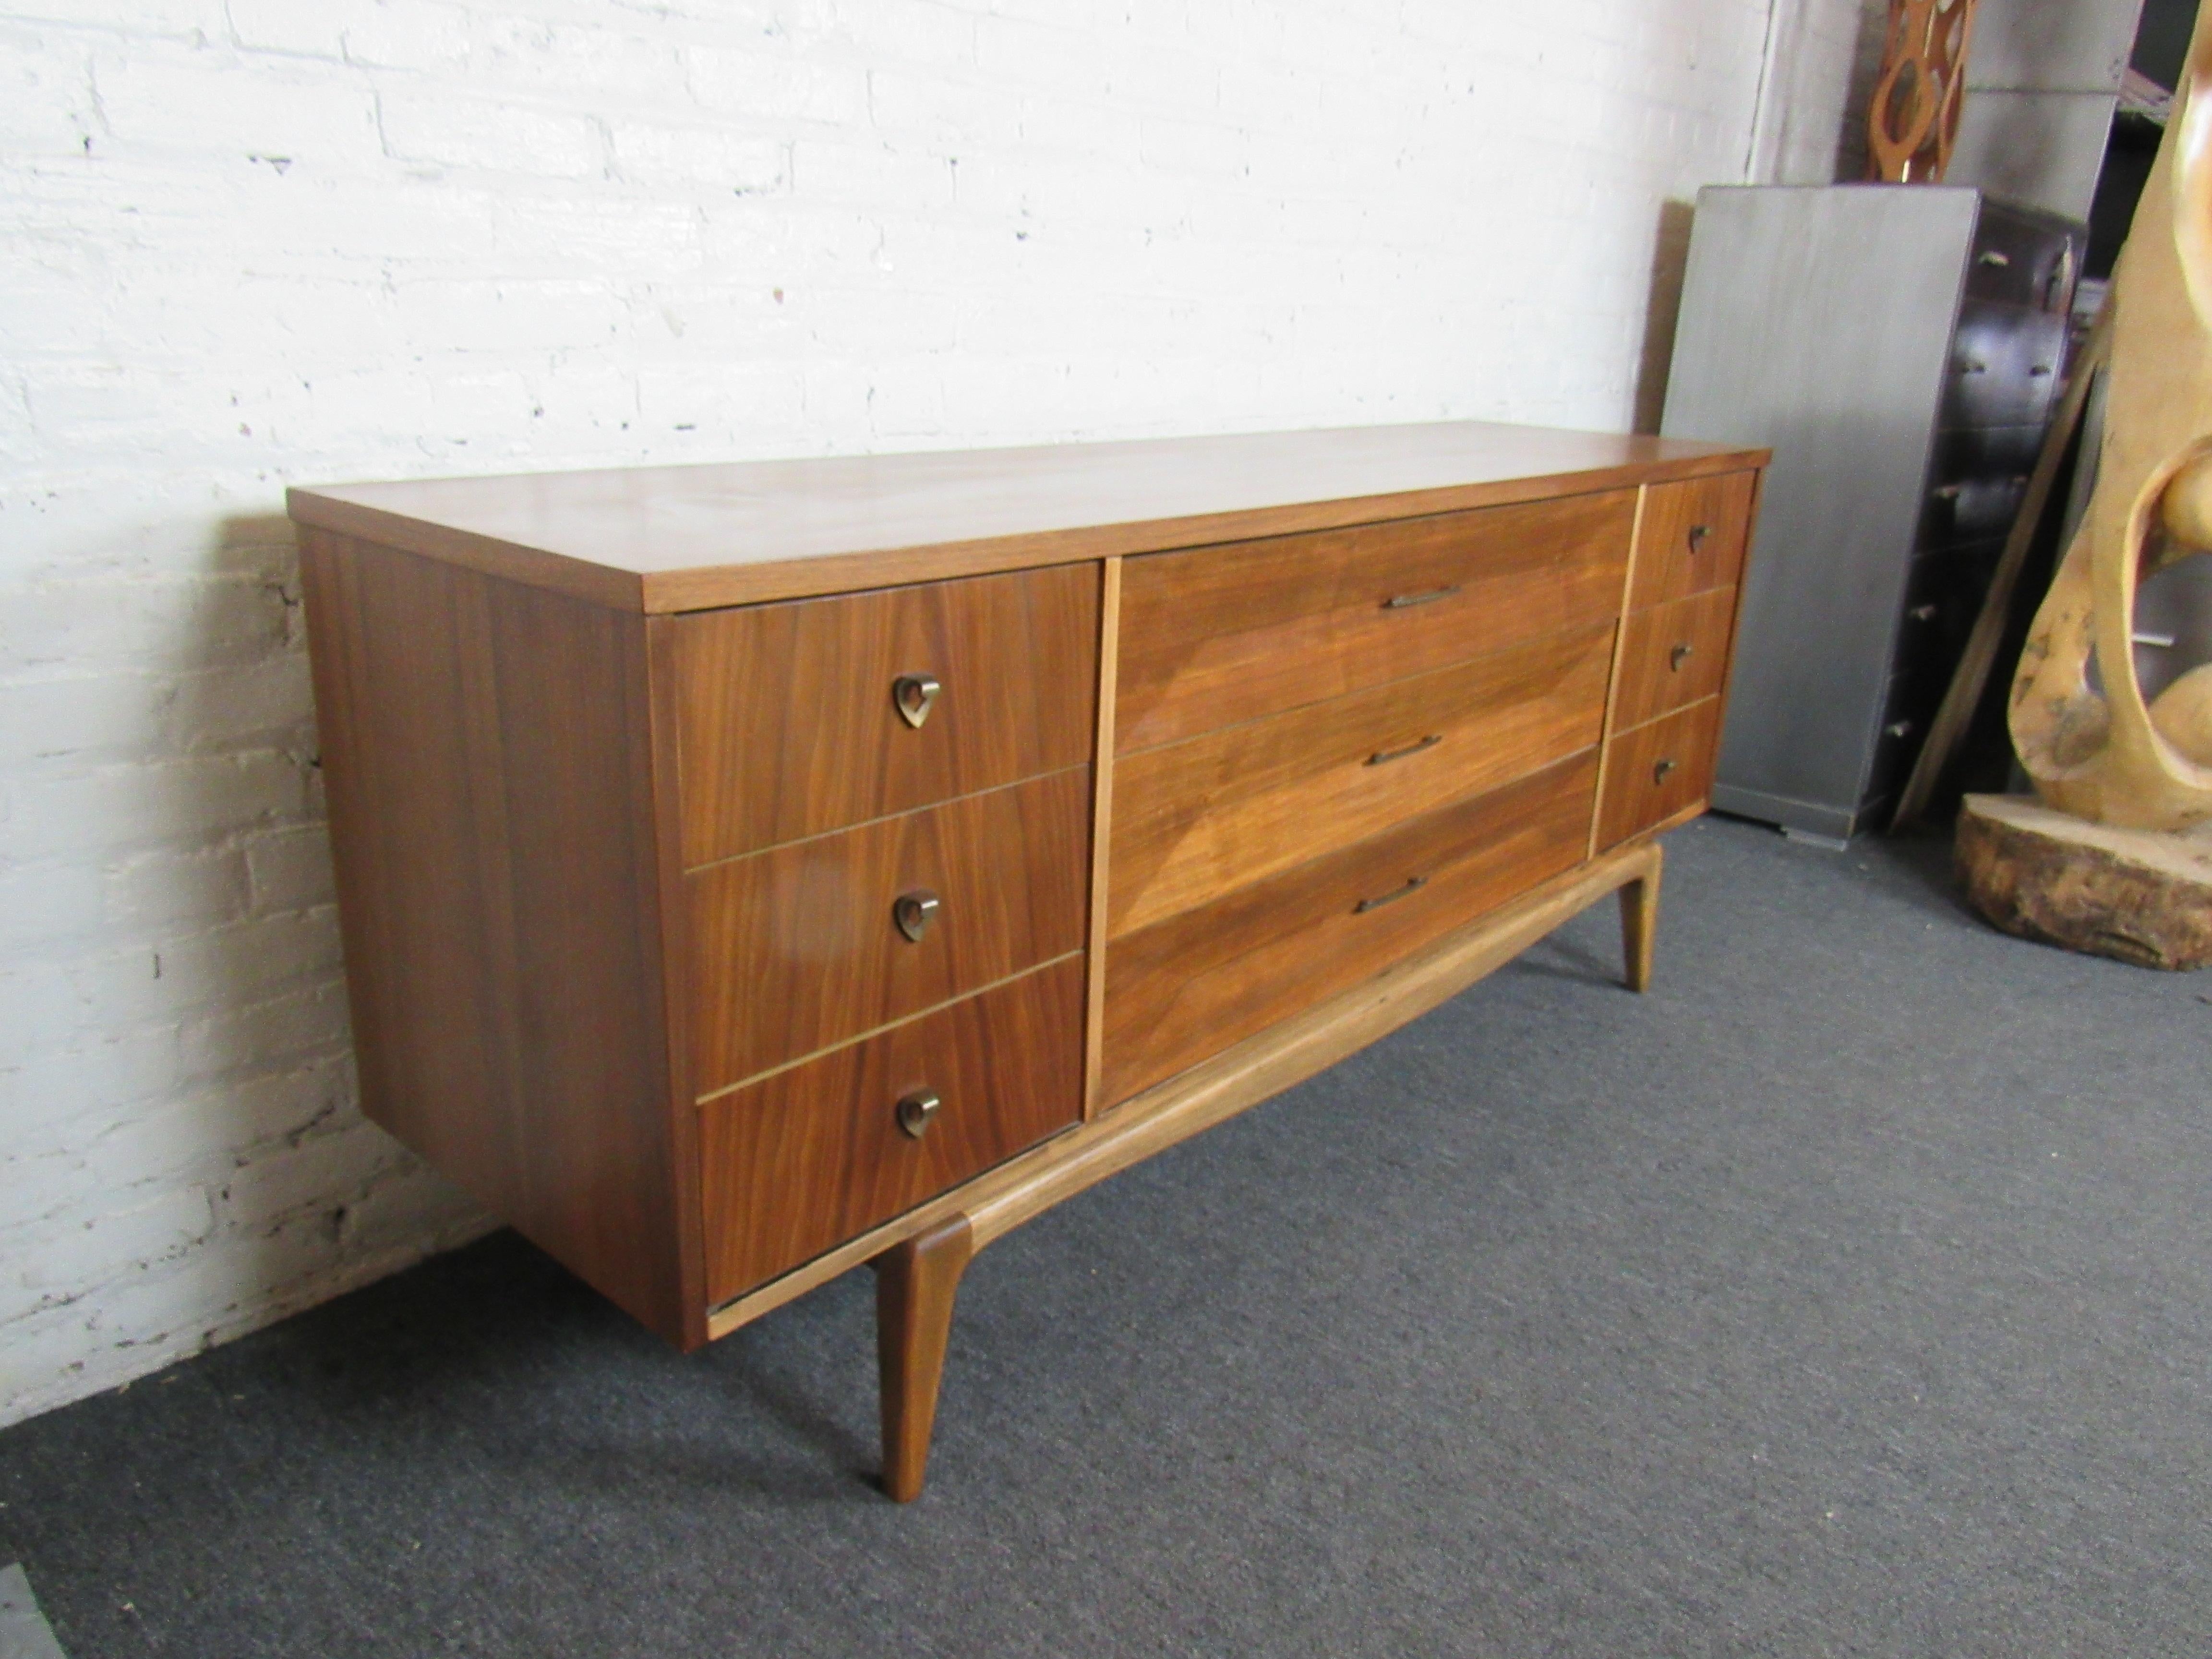 An elegant vintage credenza by United Furniture Corporation, crafted with sturdy mid-century quality and rich walnut. Please confirm item location with seller (NY/NJ).